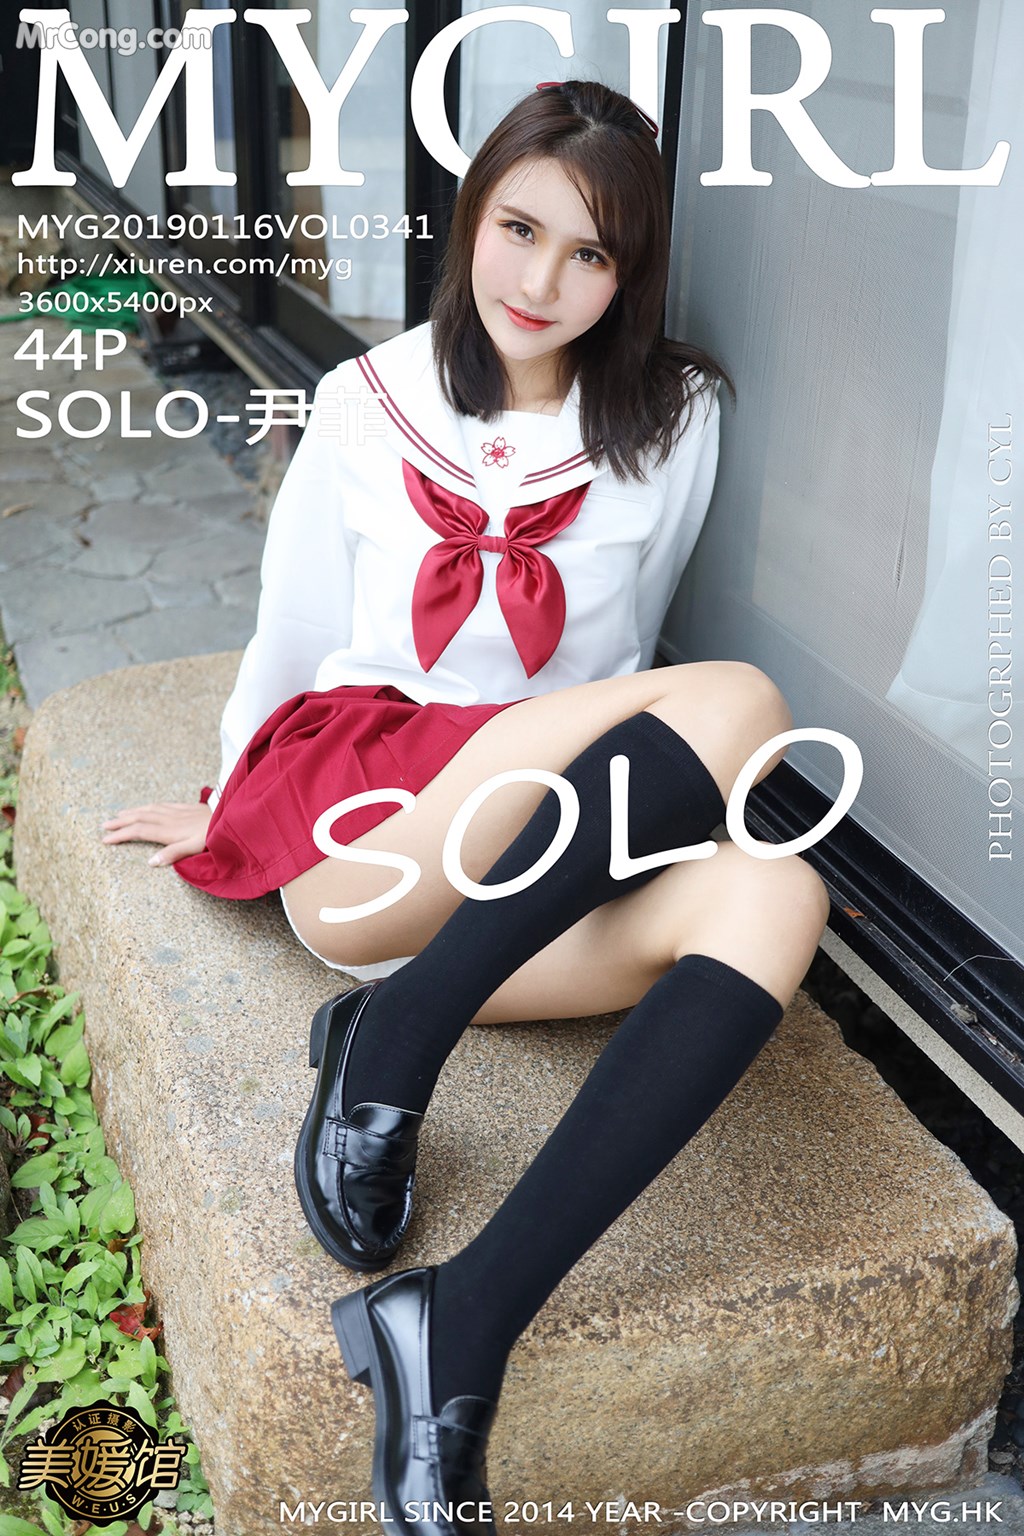 MyGirl Vol.341: Model SOLO_ 尹 菲 (45 pictures)